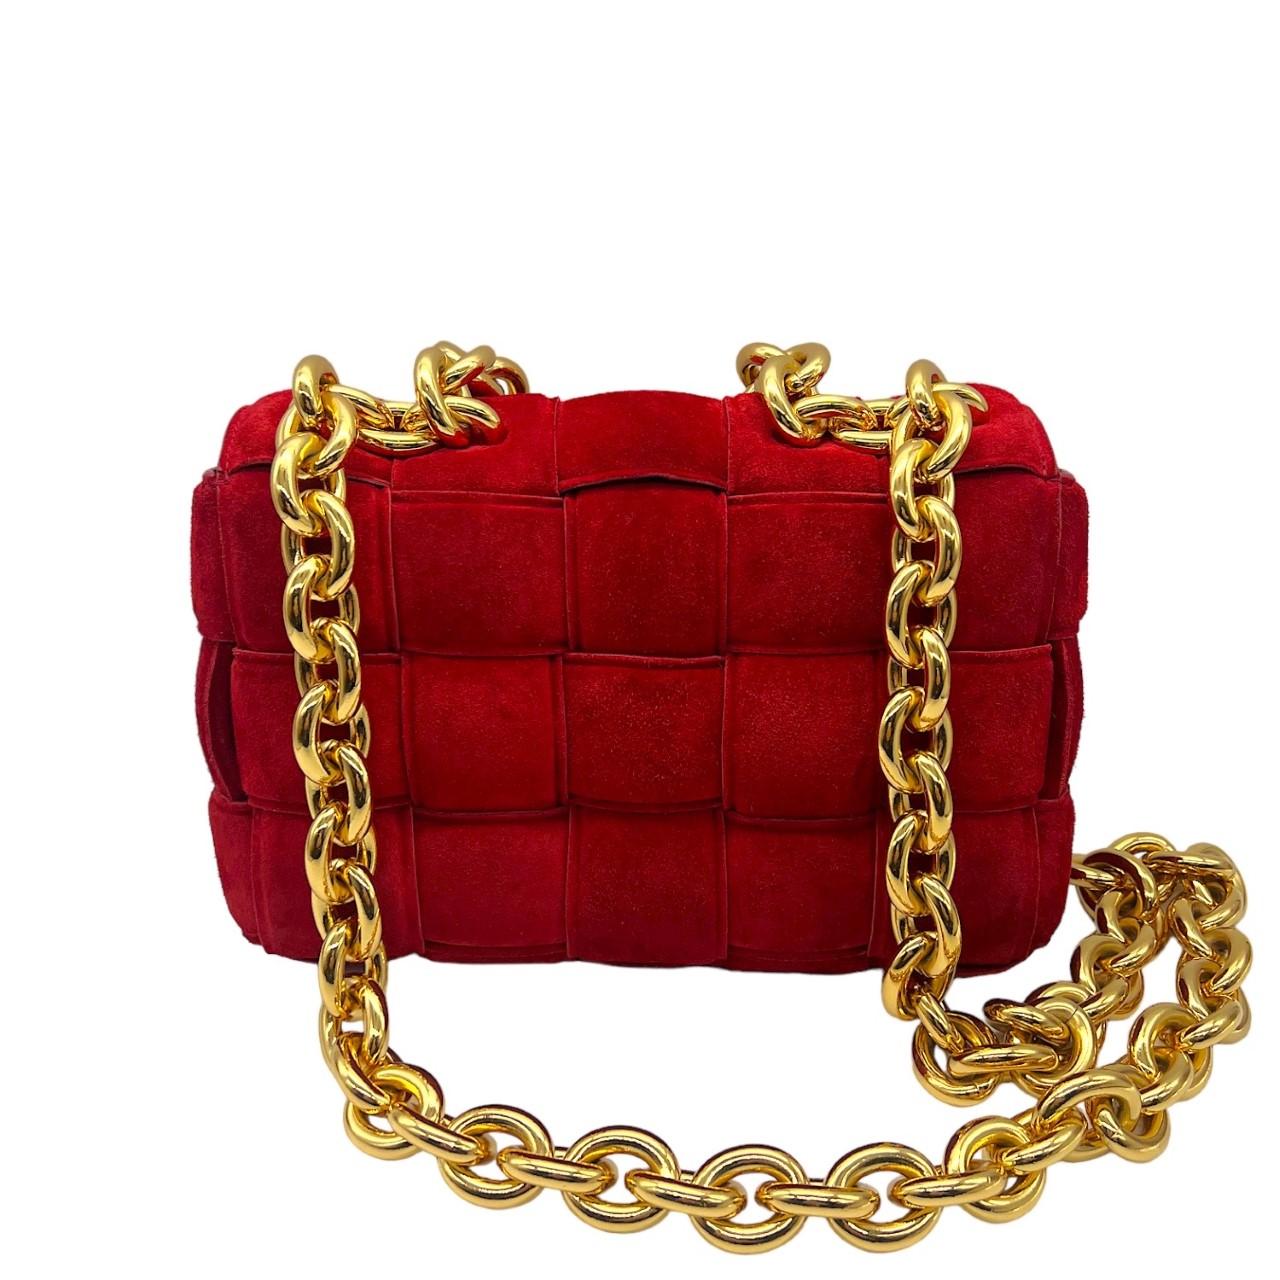 We are offering this coveted red Bottega Veneta crossbody bag. Made in Italy, it is finely crafted of a padded intrecciato suede exterior with leather trims. It has a heavy chain-link handle and shoulder strap made from gold-tone hardware. It